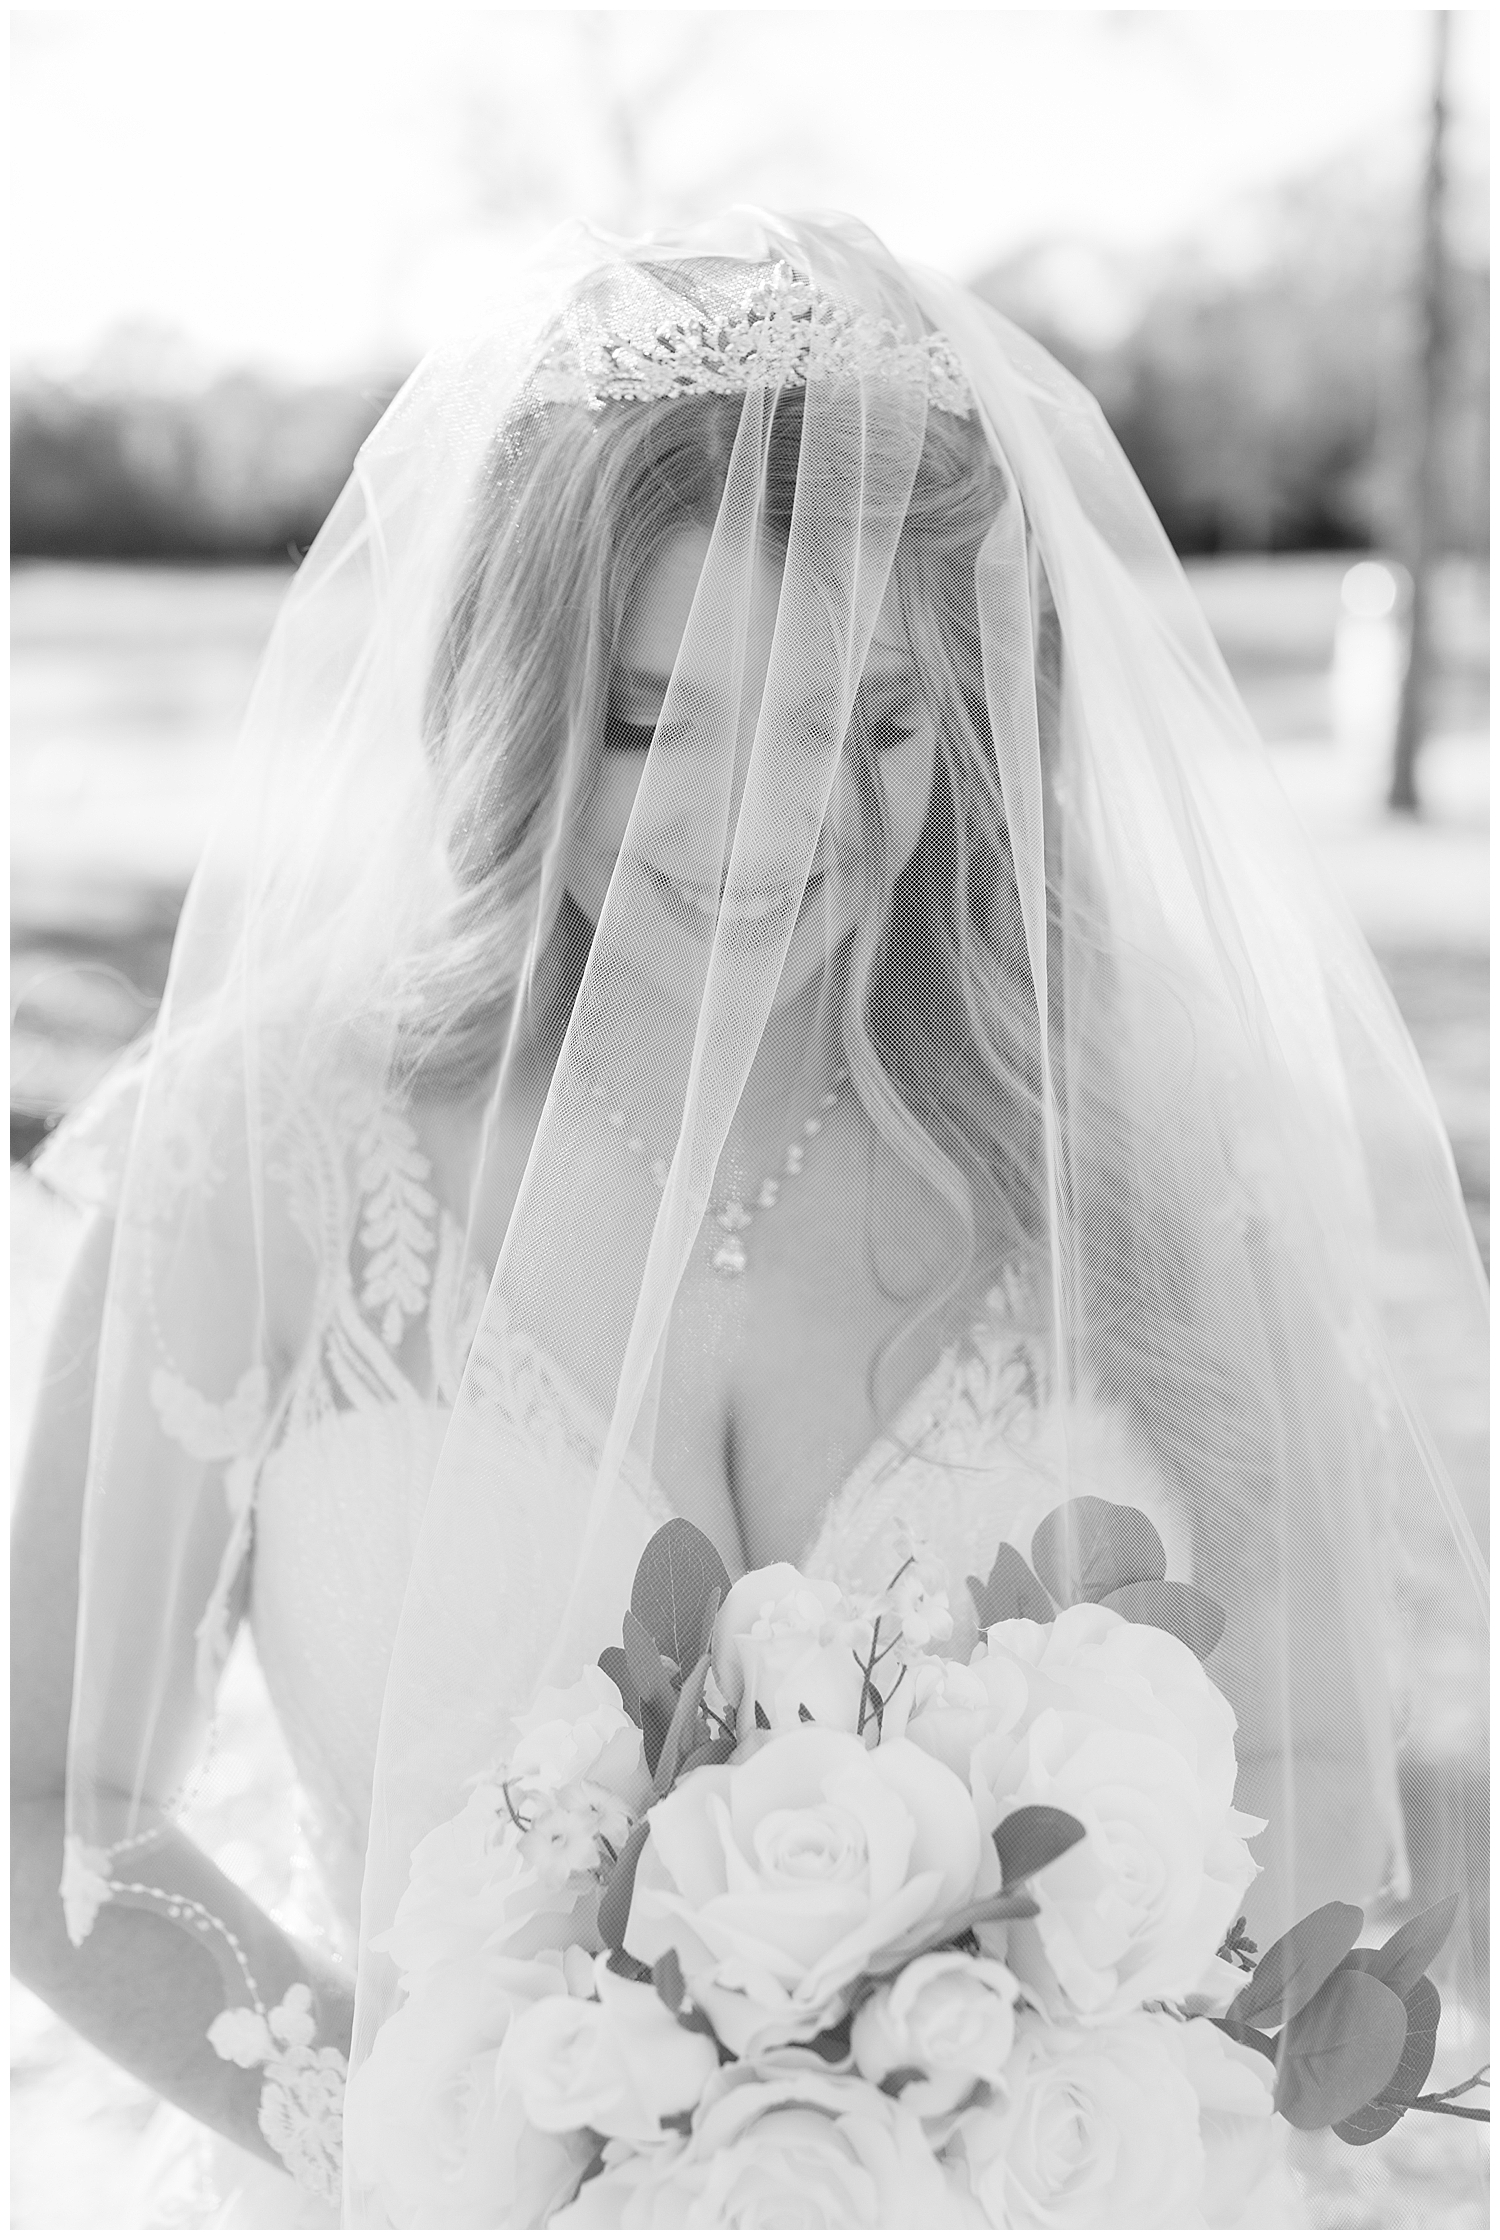 Juliann Riggs Photography captures a timeless photo of a bride at Three Lakes Manor.